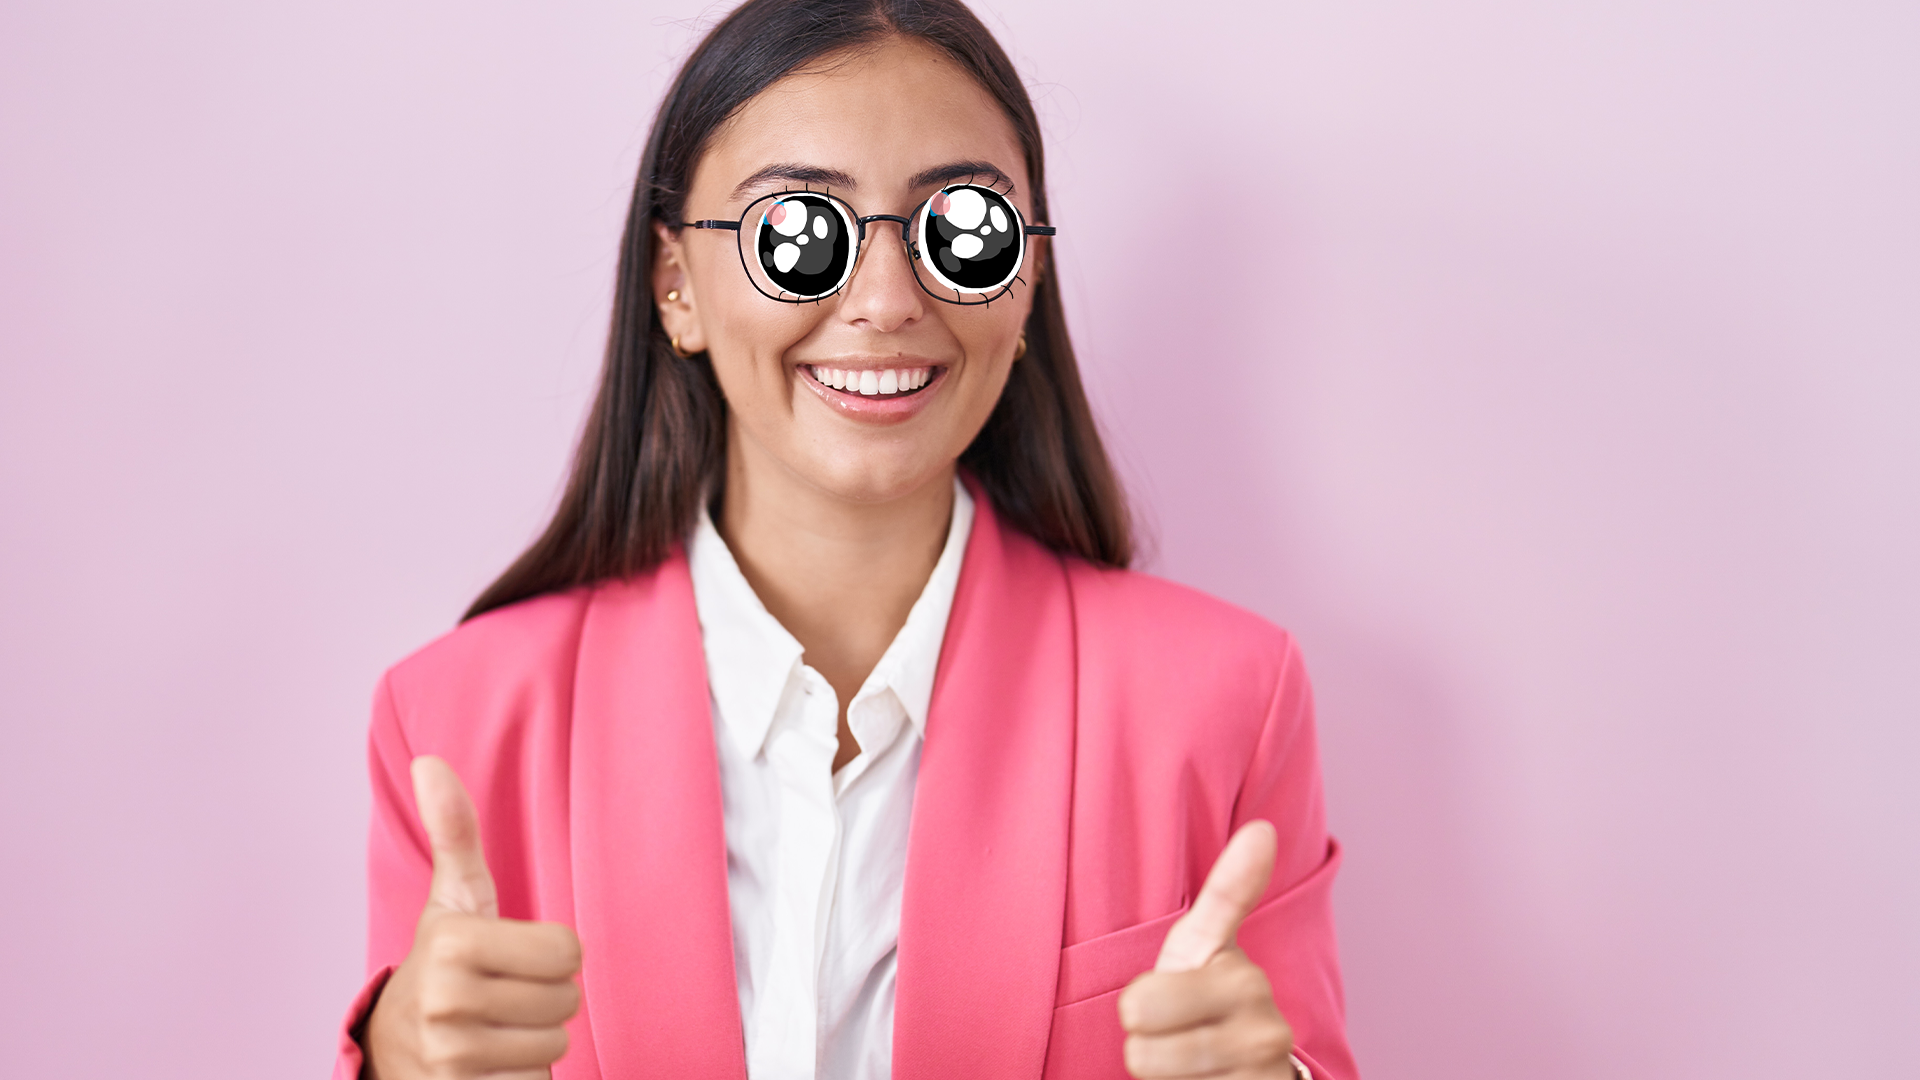 Women in pink suit doing thumbs up